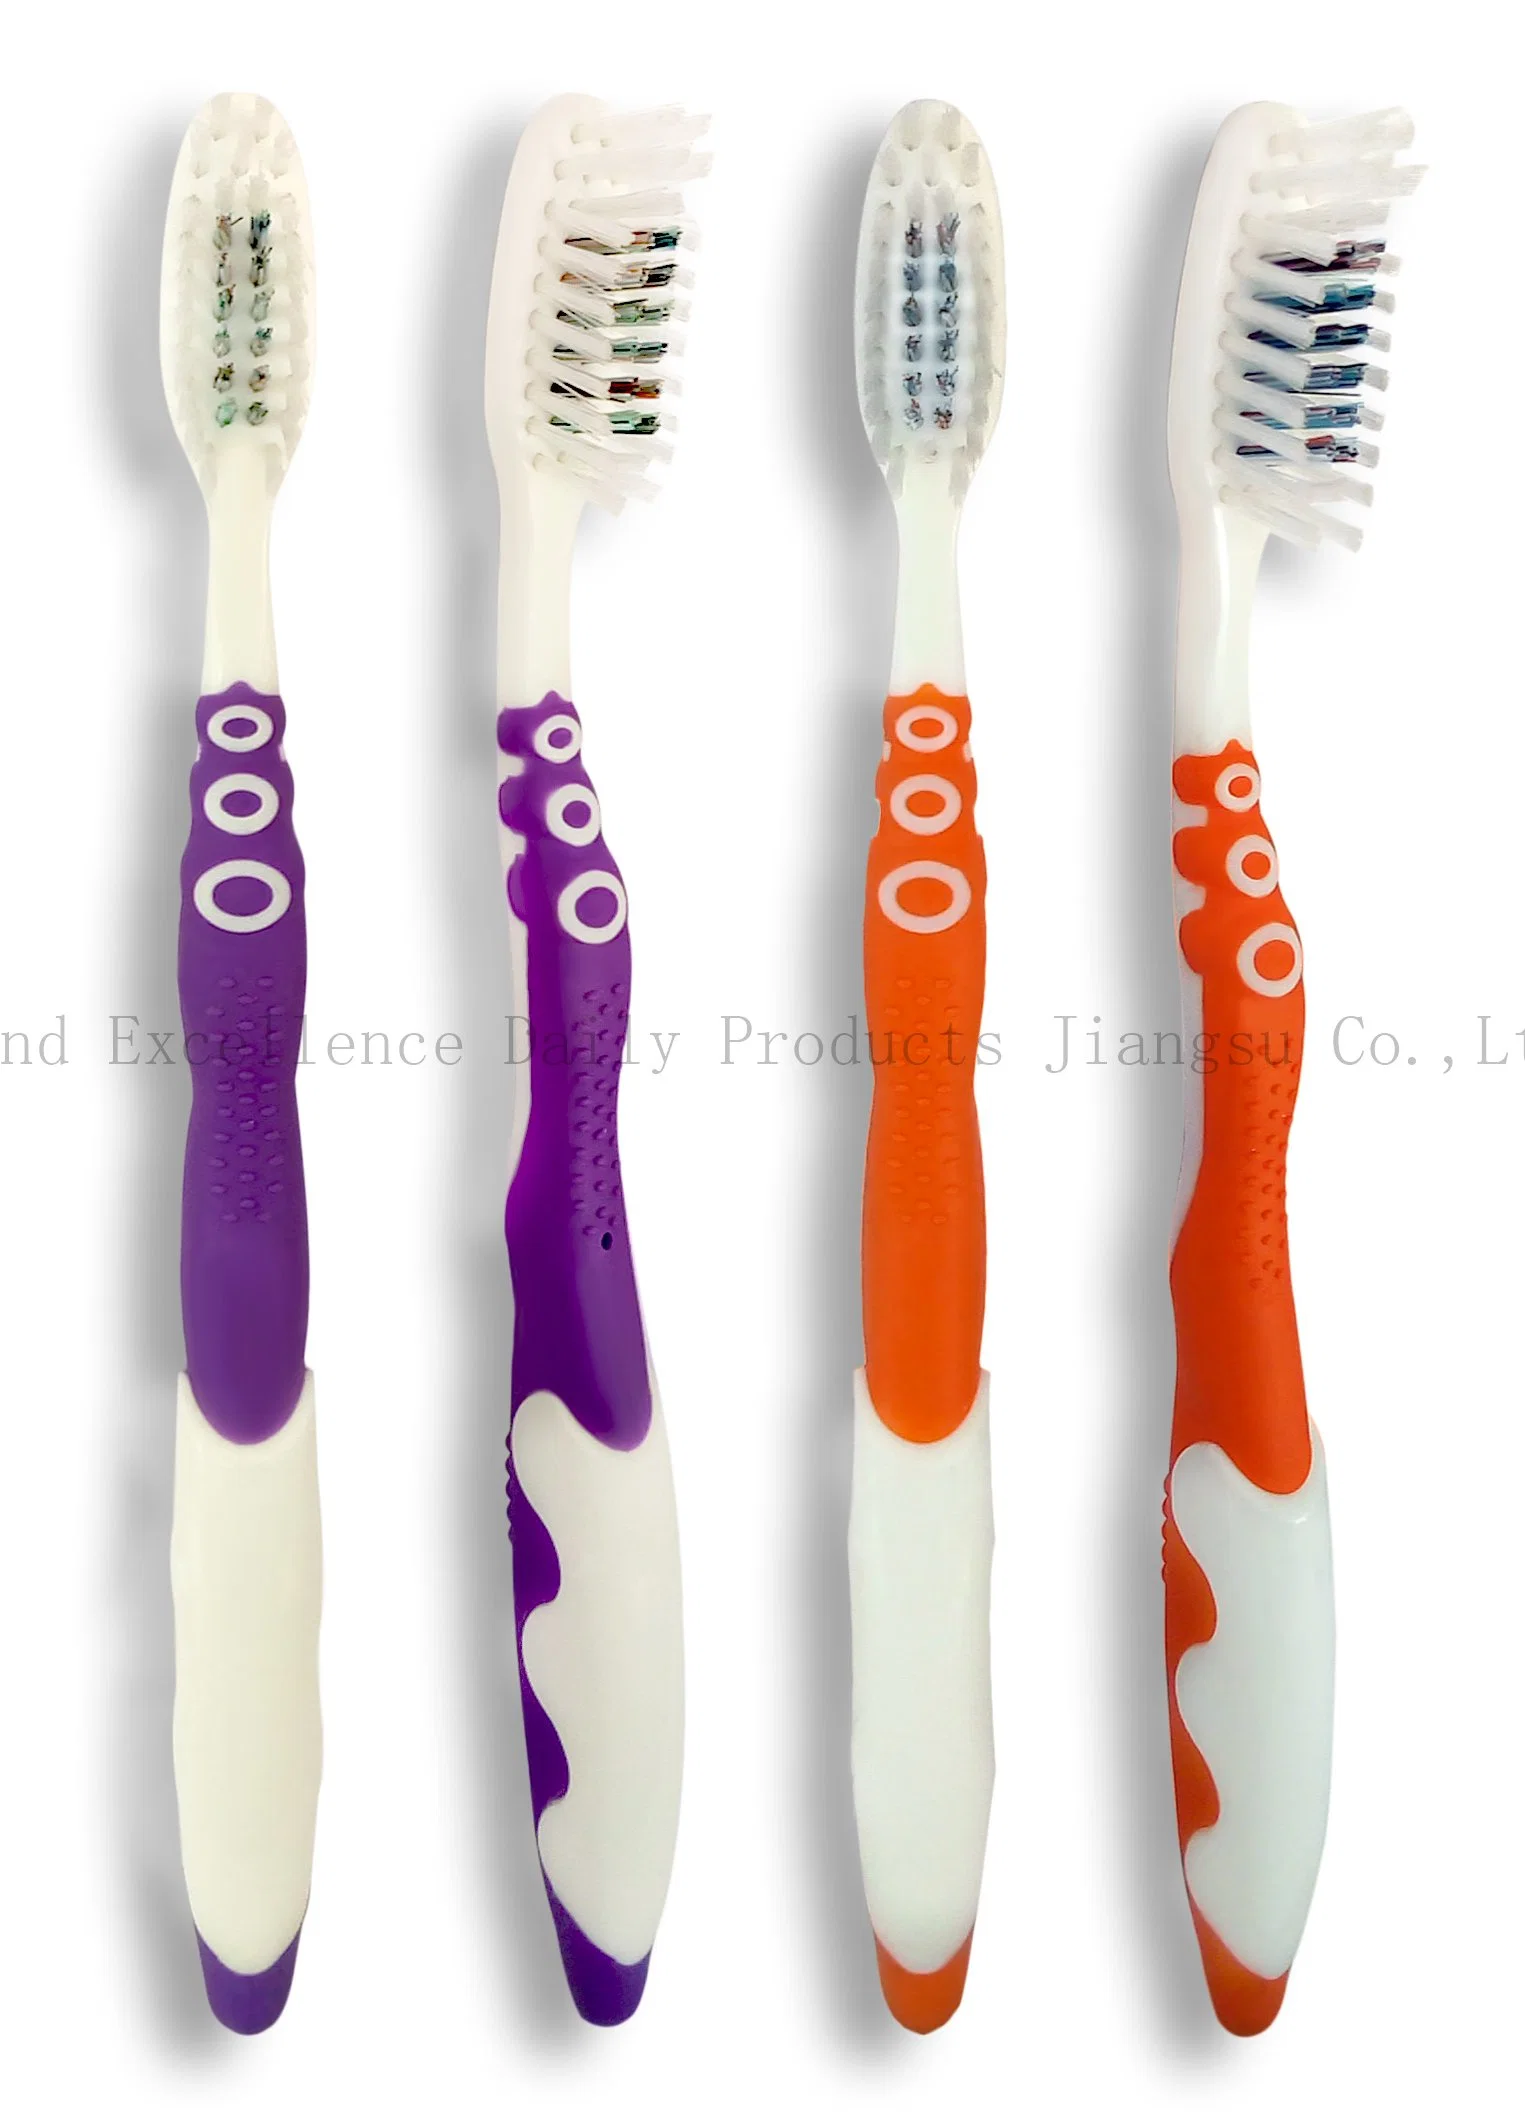 Versatile Manual Toothbrush for Comprehensive Oral Care